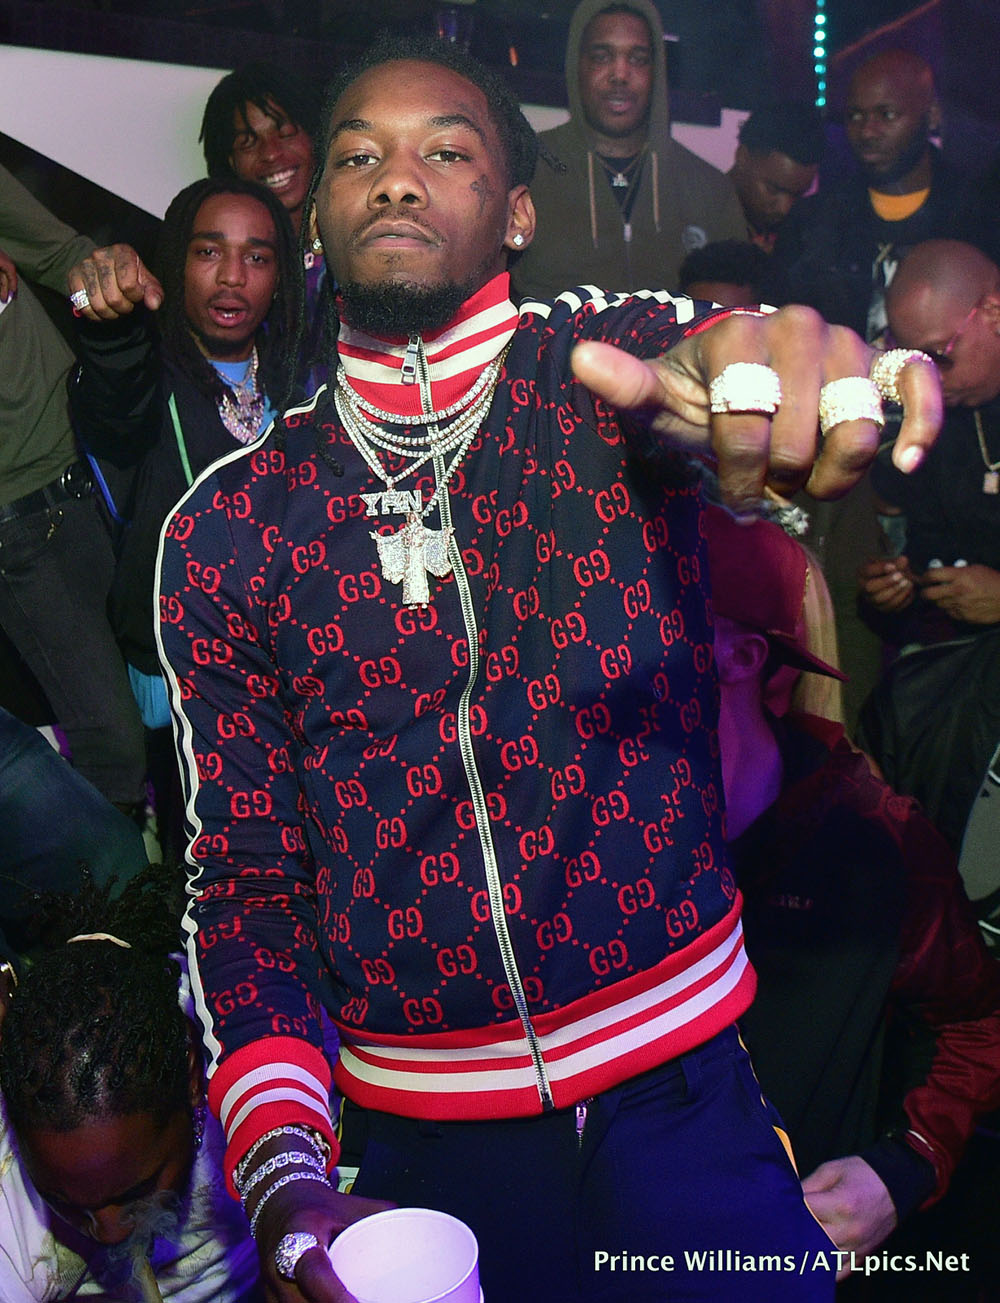 of Migos, Attends Gucci Mane Album Release Party at Gold Room in Atlanta | Sandra Rose